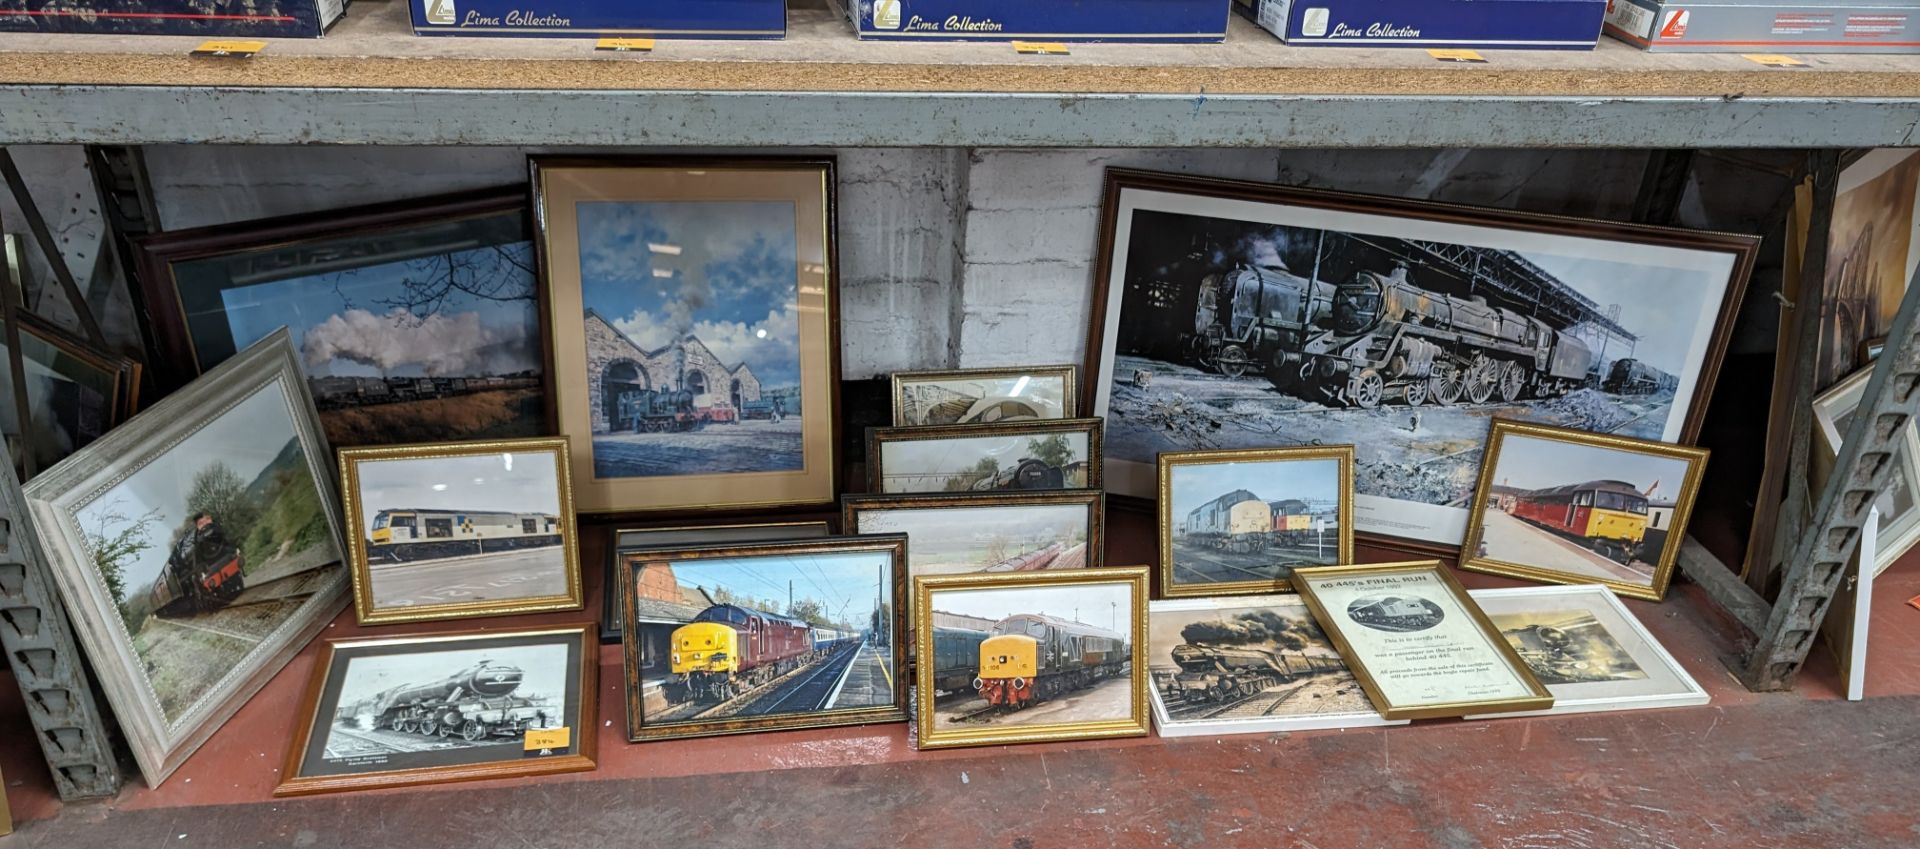 The contents of a bay of railway related photographs & pictures, all individually framed - 17 items - Image 2 of 15